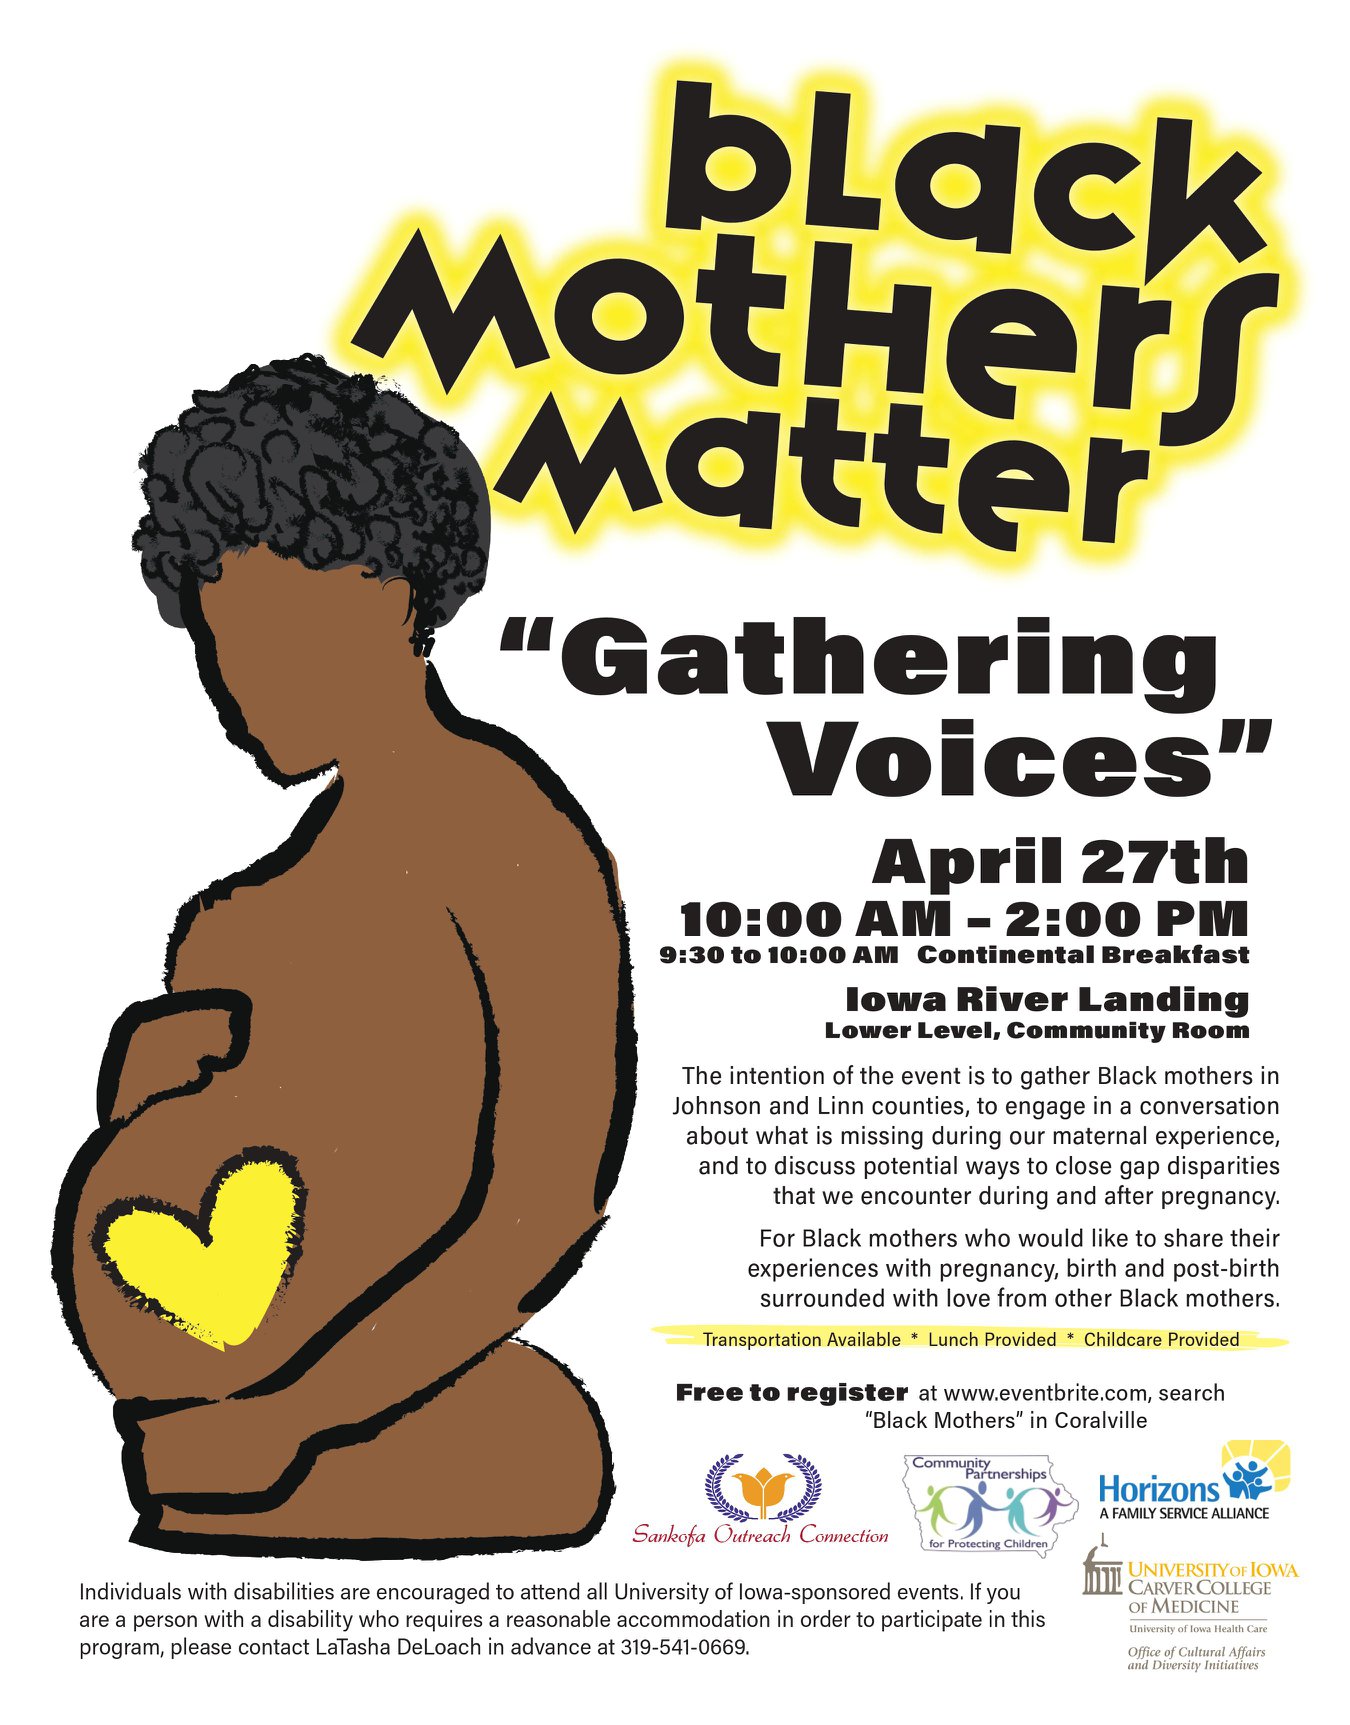 Gathering Voices (Black Mothers Matter) promotional image